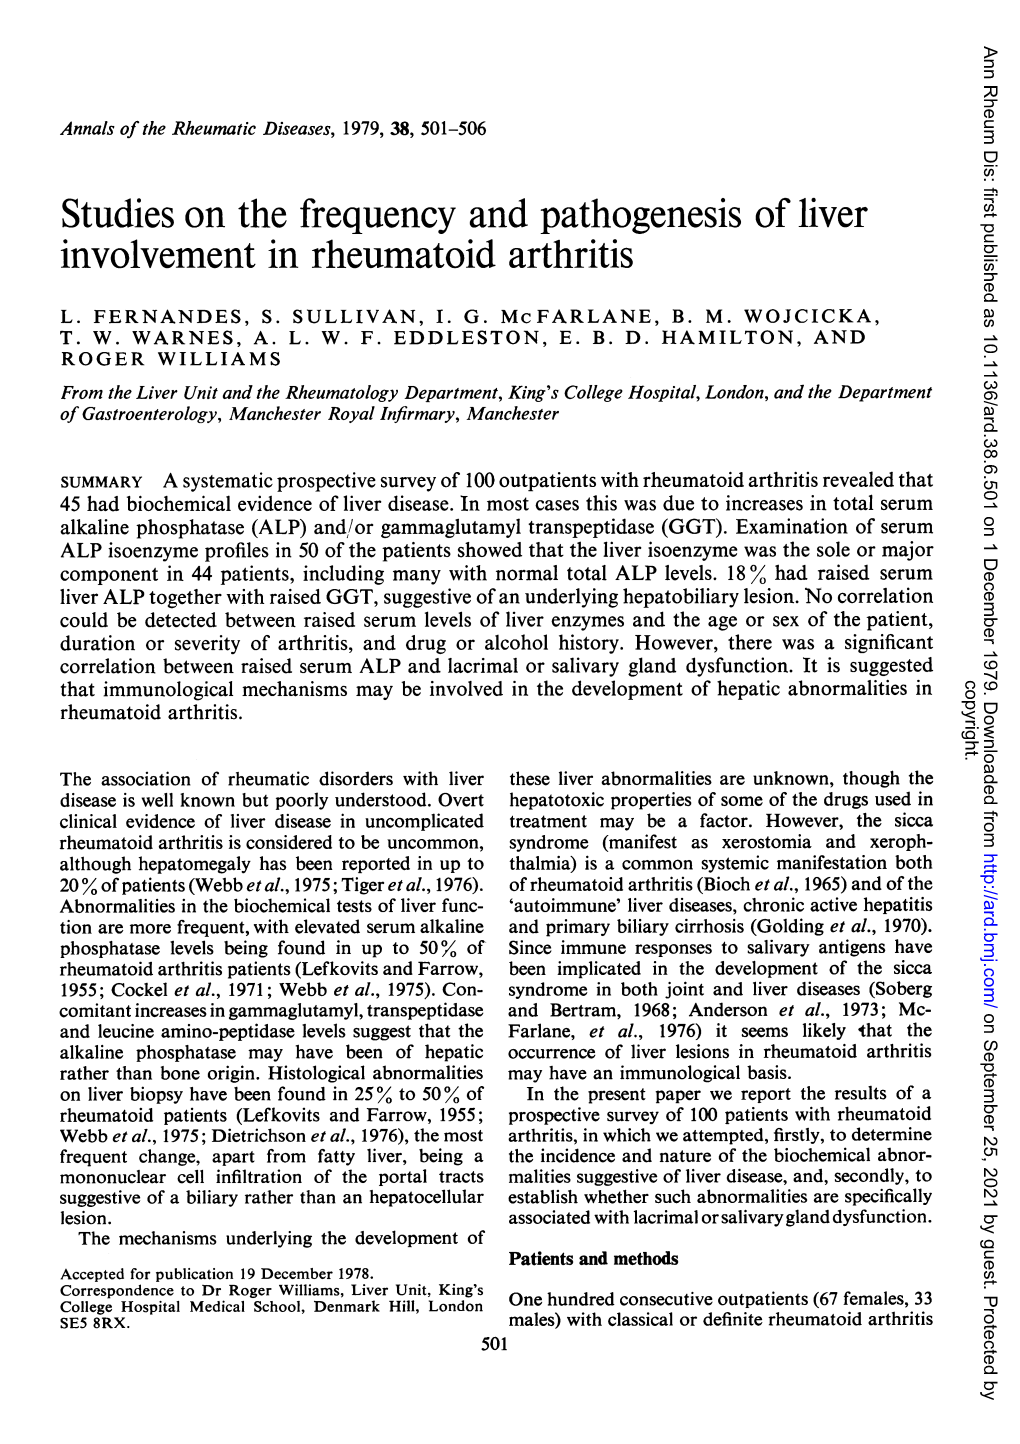 Studies on the Frequency and Pathogenesis of Liver Involvement in Rheumatoid Arthritis